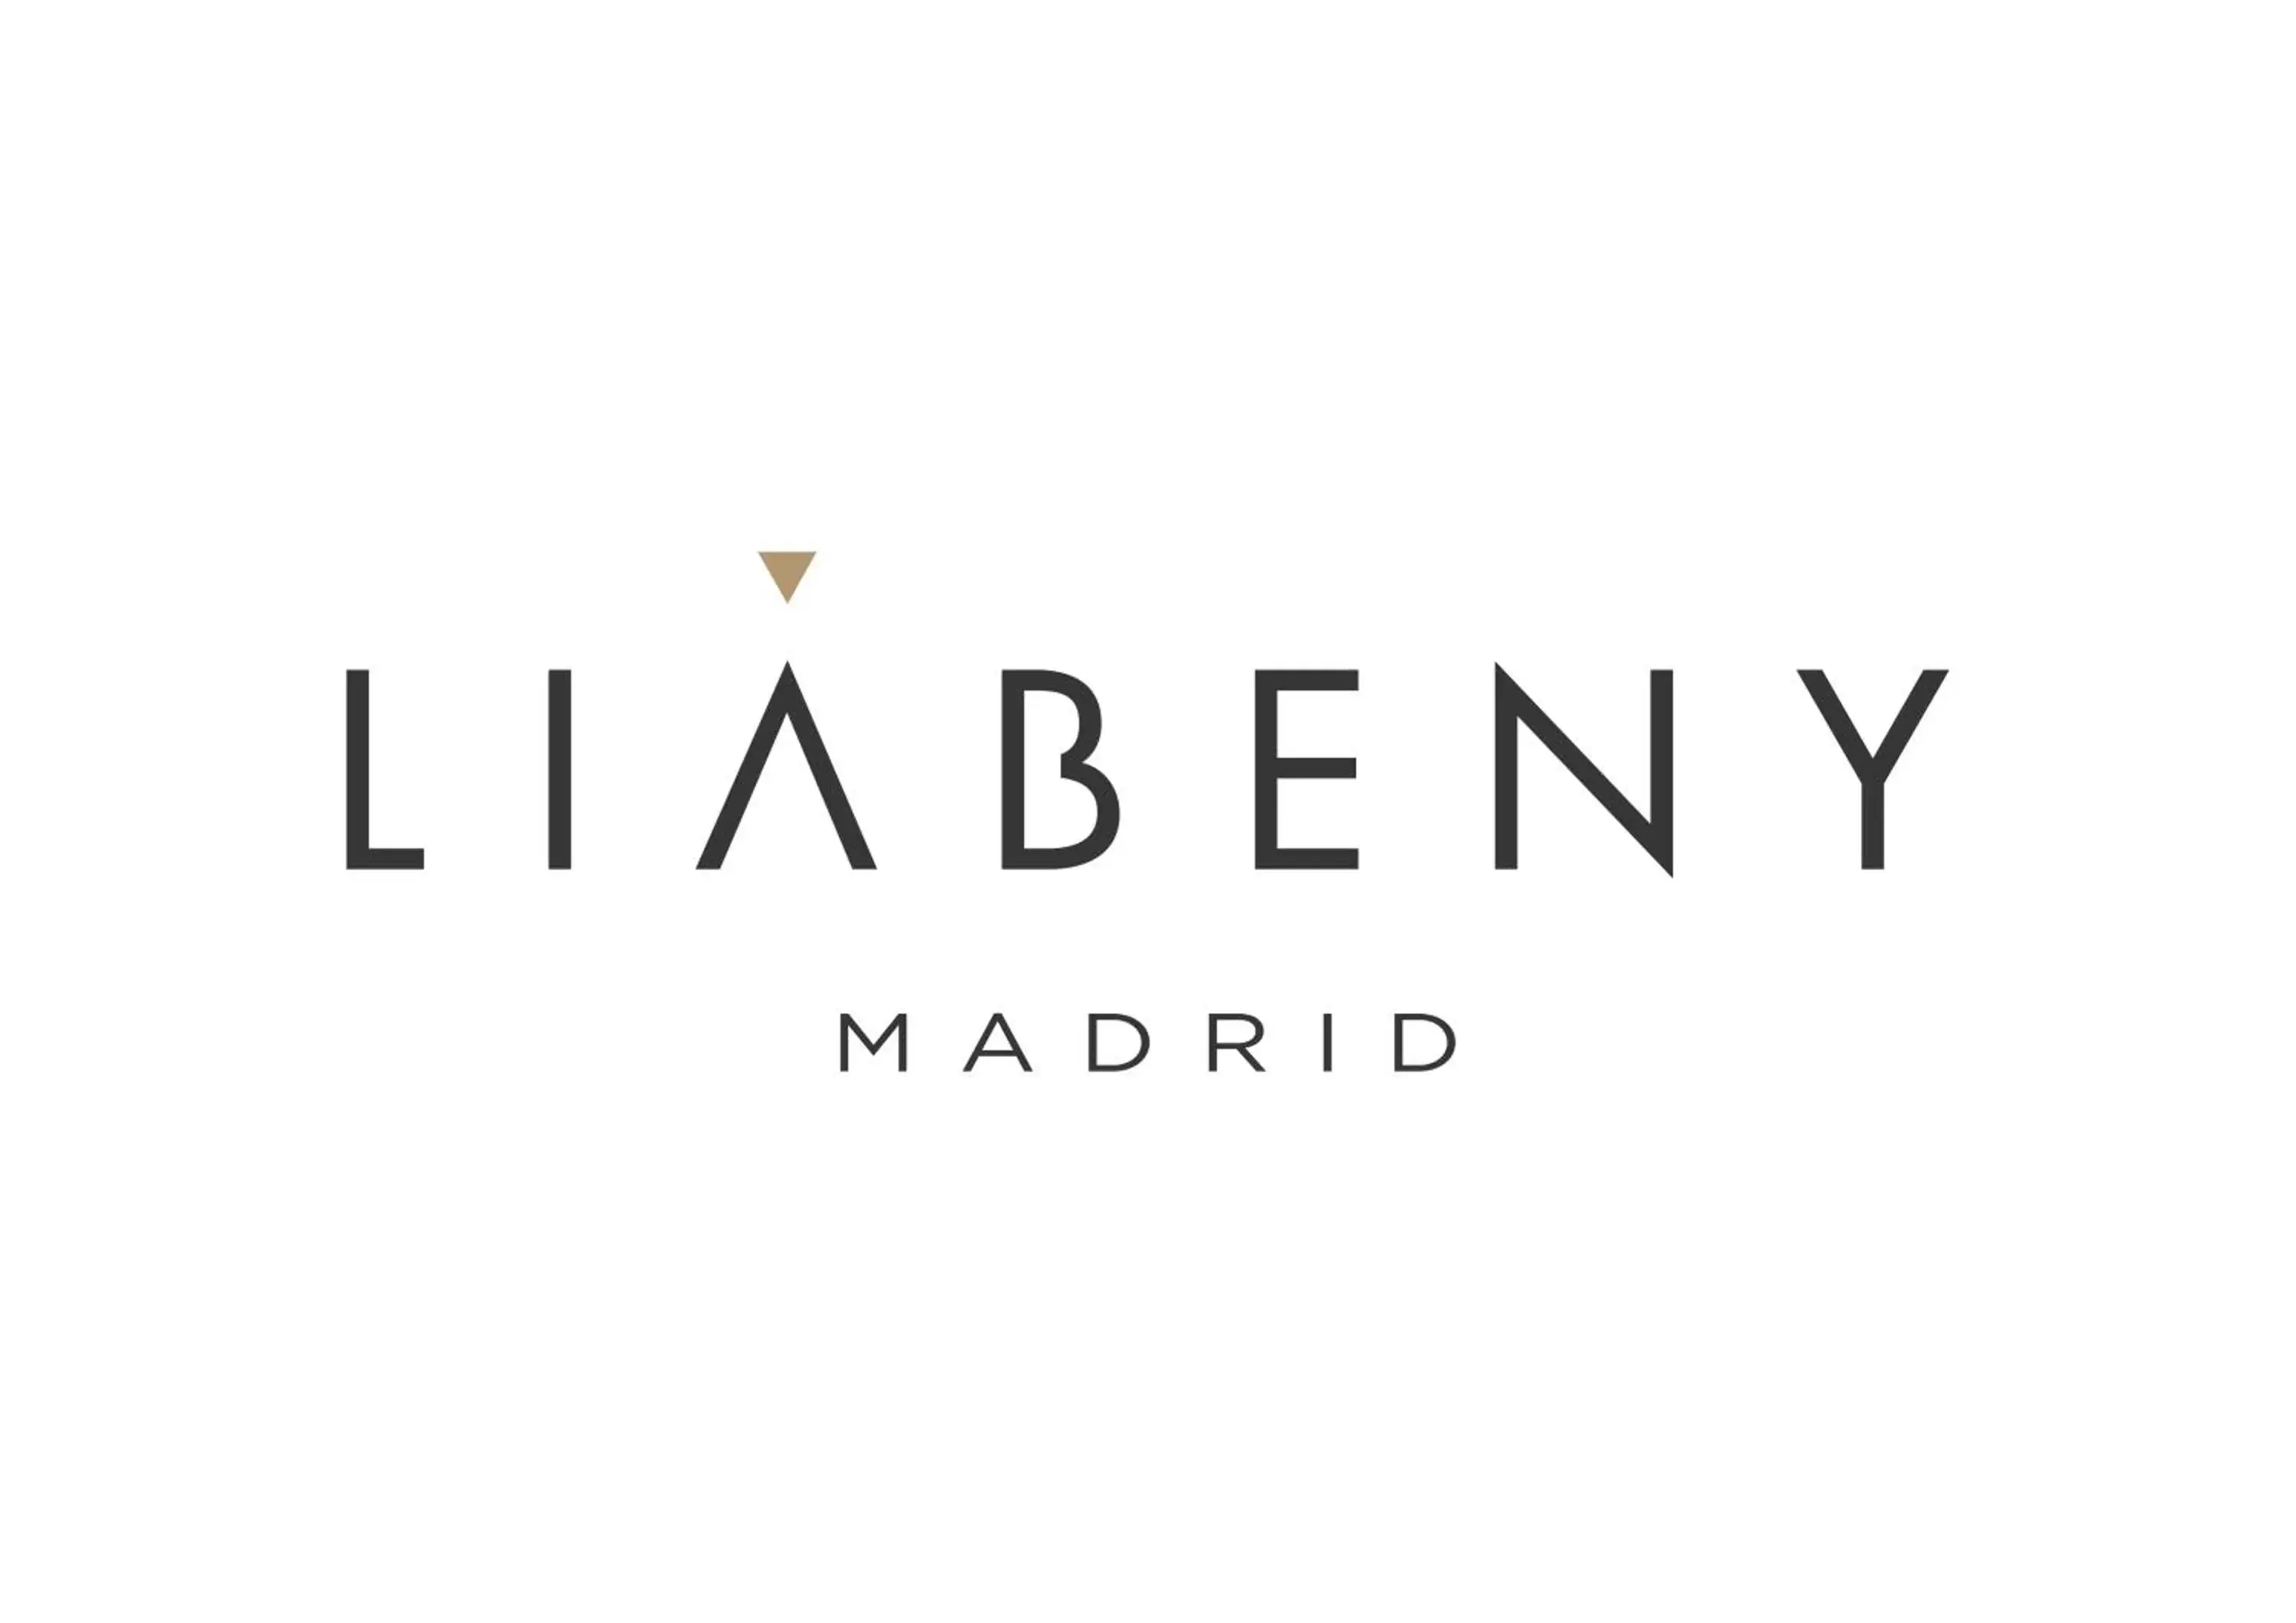 Property logo or sign in Hotel Liabeny